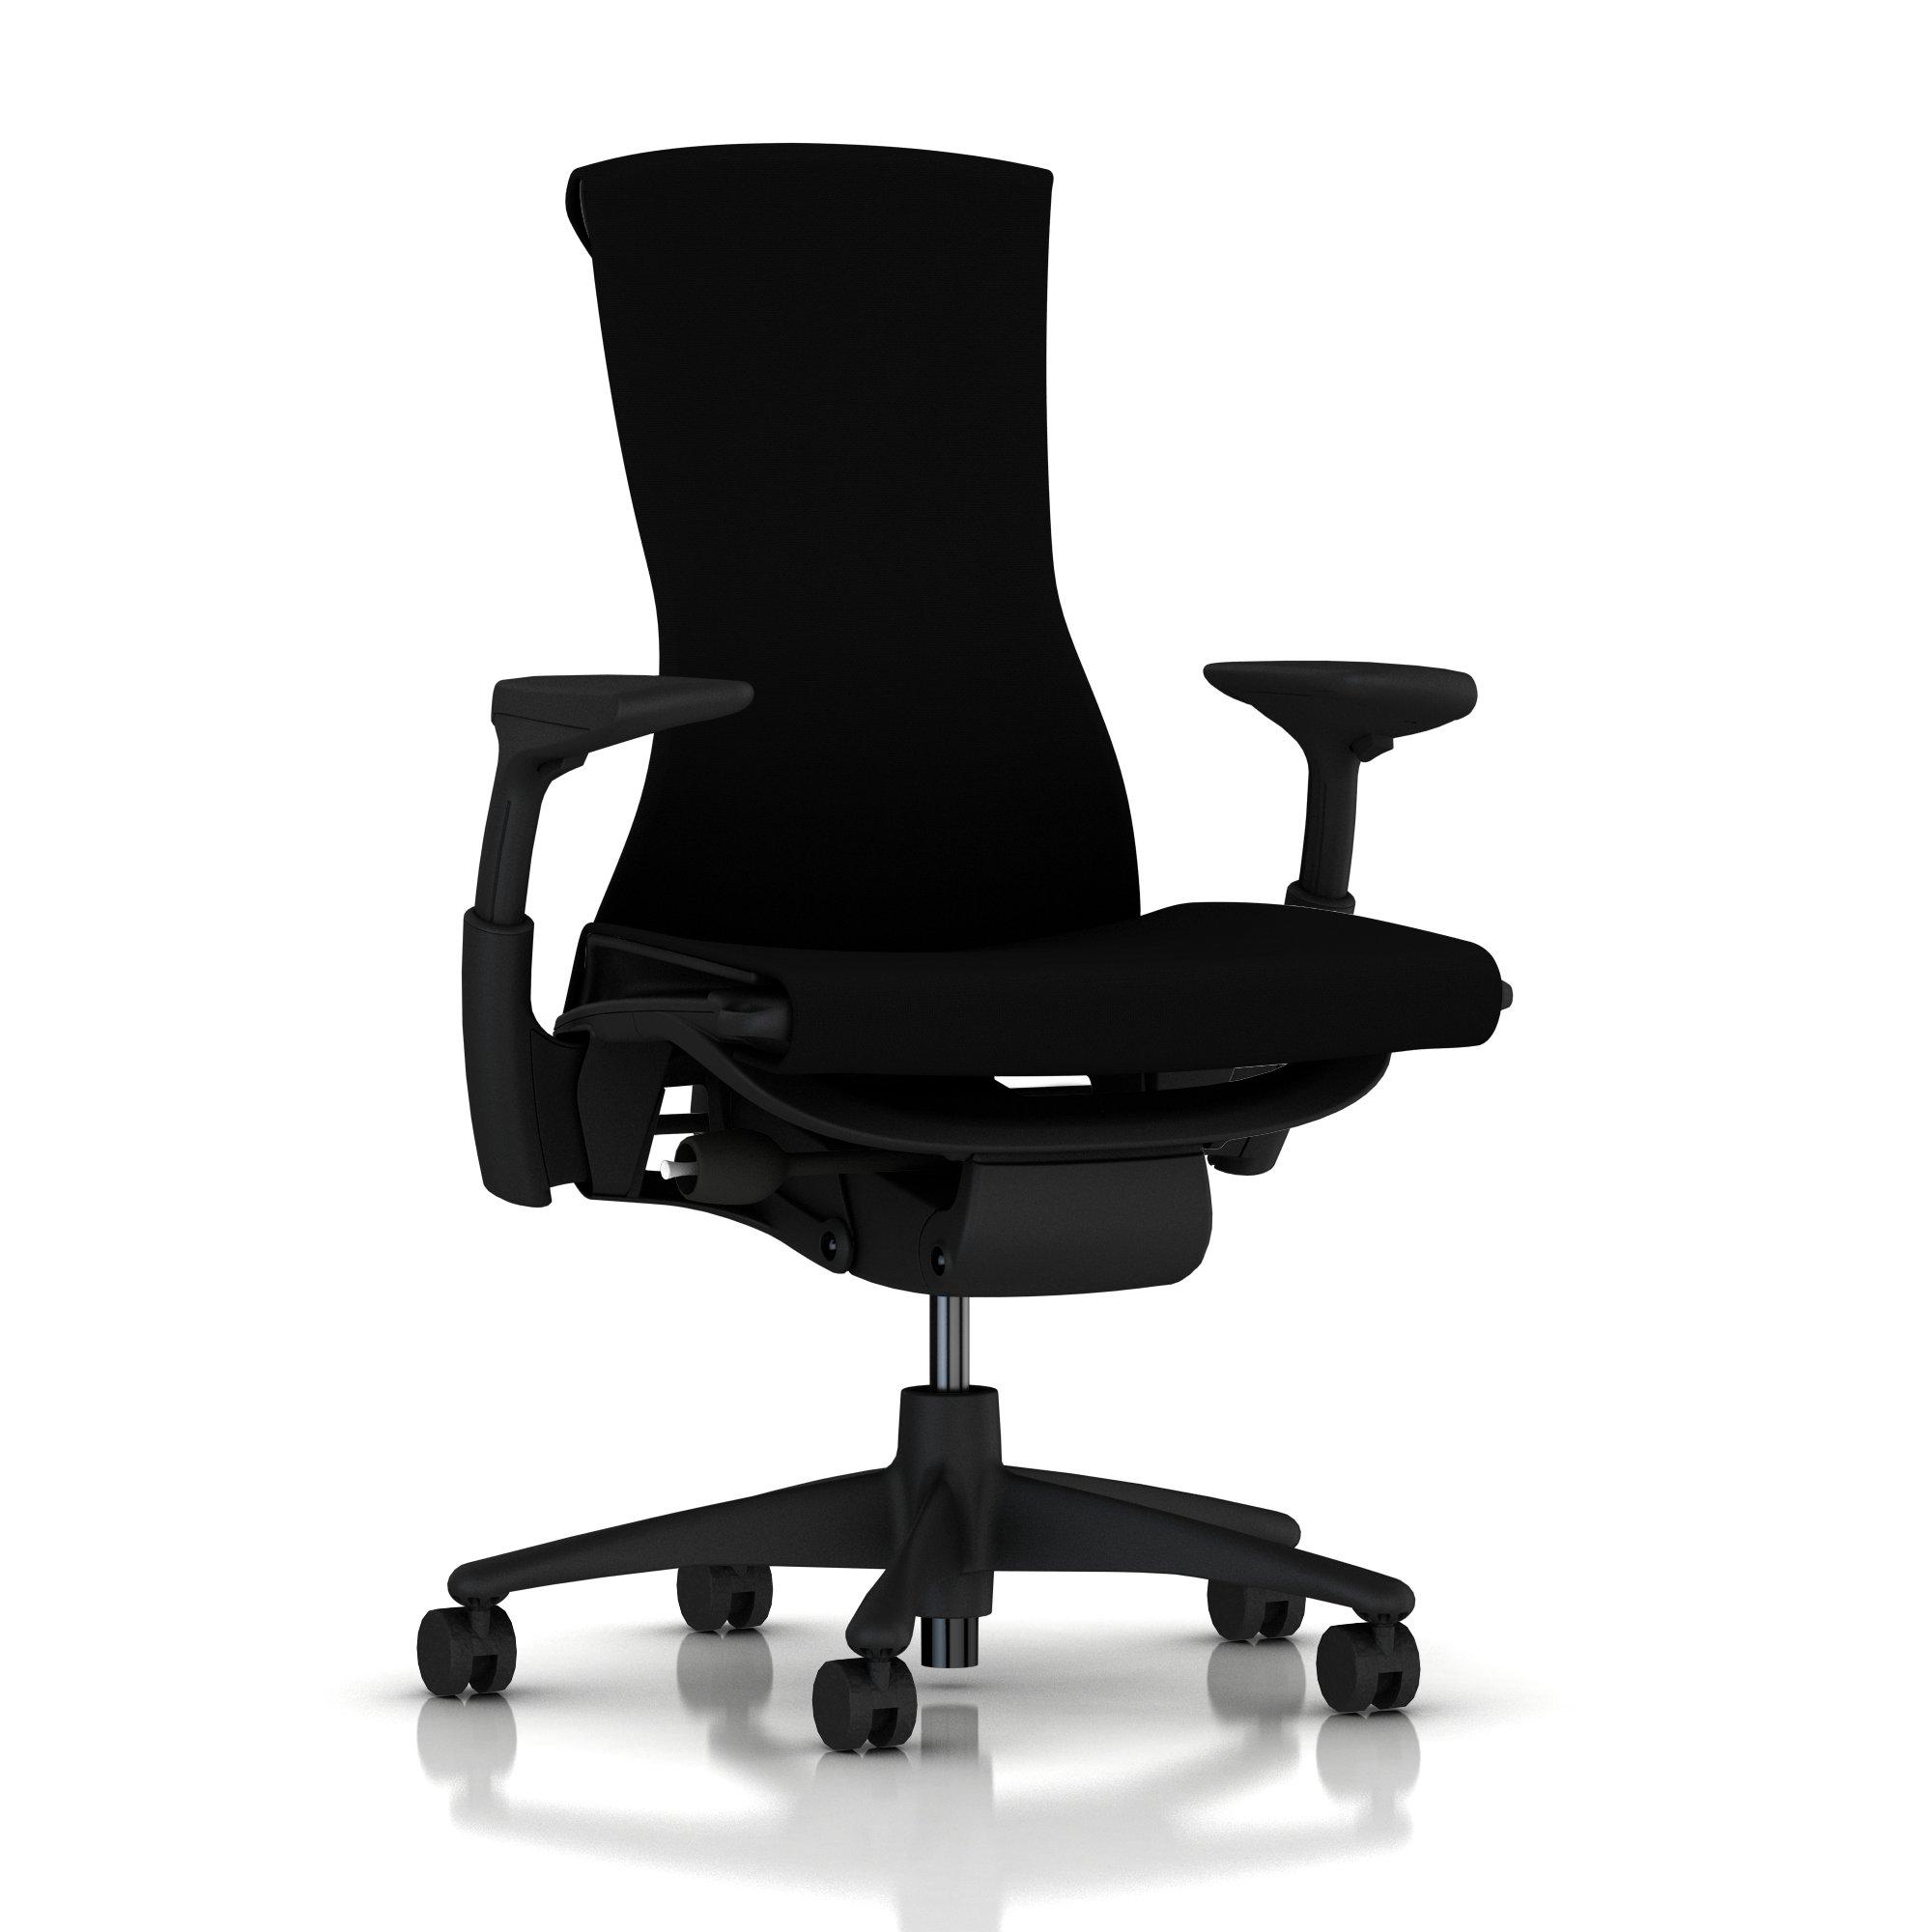 Herman Miller Embody Chair Black Rhythm with Graphite Frame and Graphite Base. Embody Home Office Desk Chair by Herman Miller.